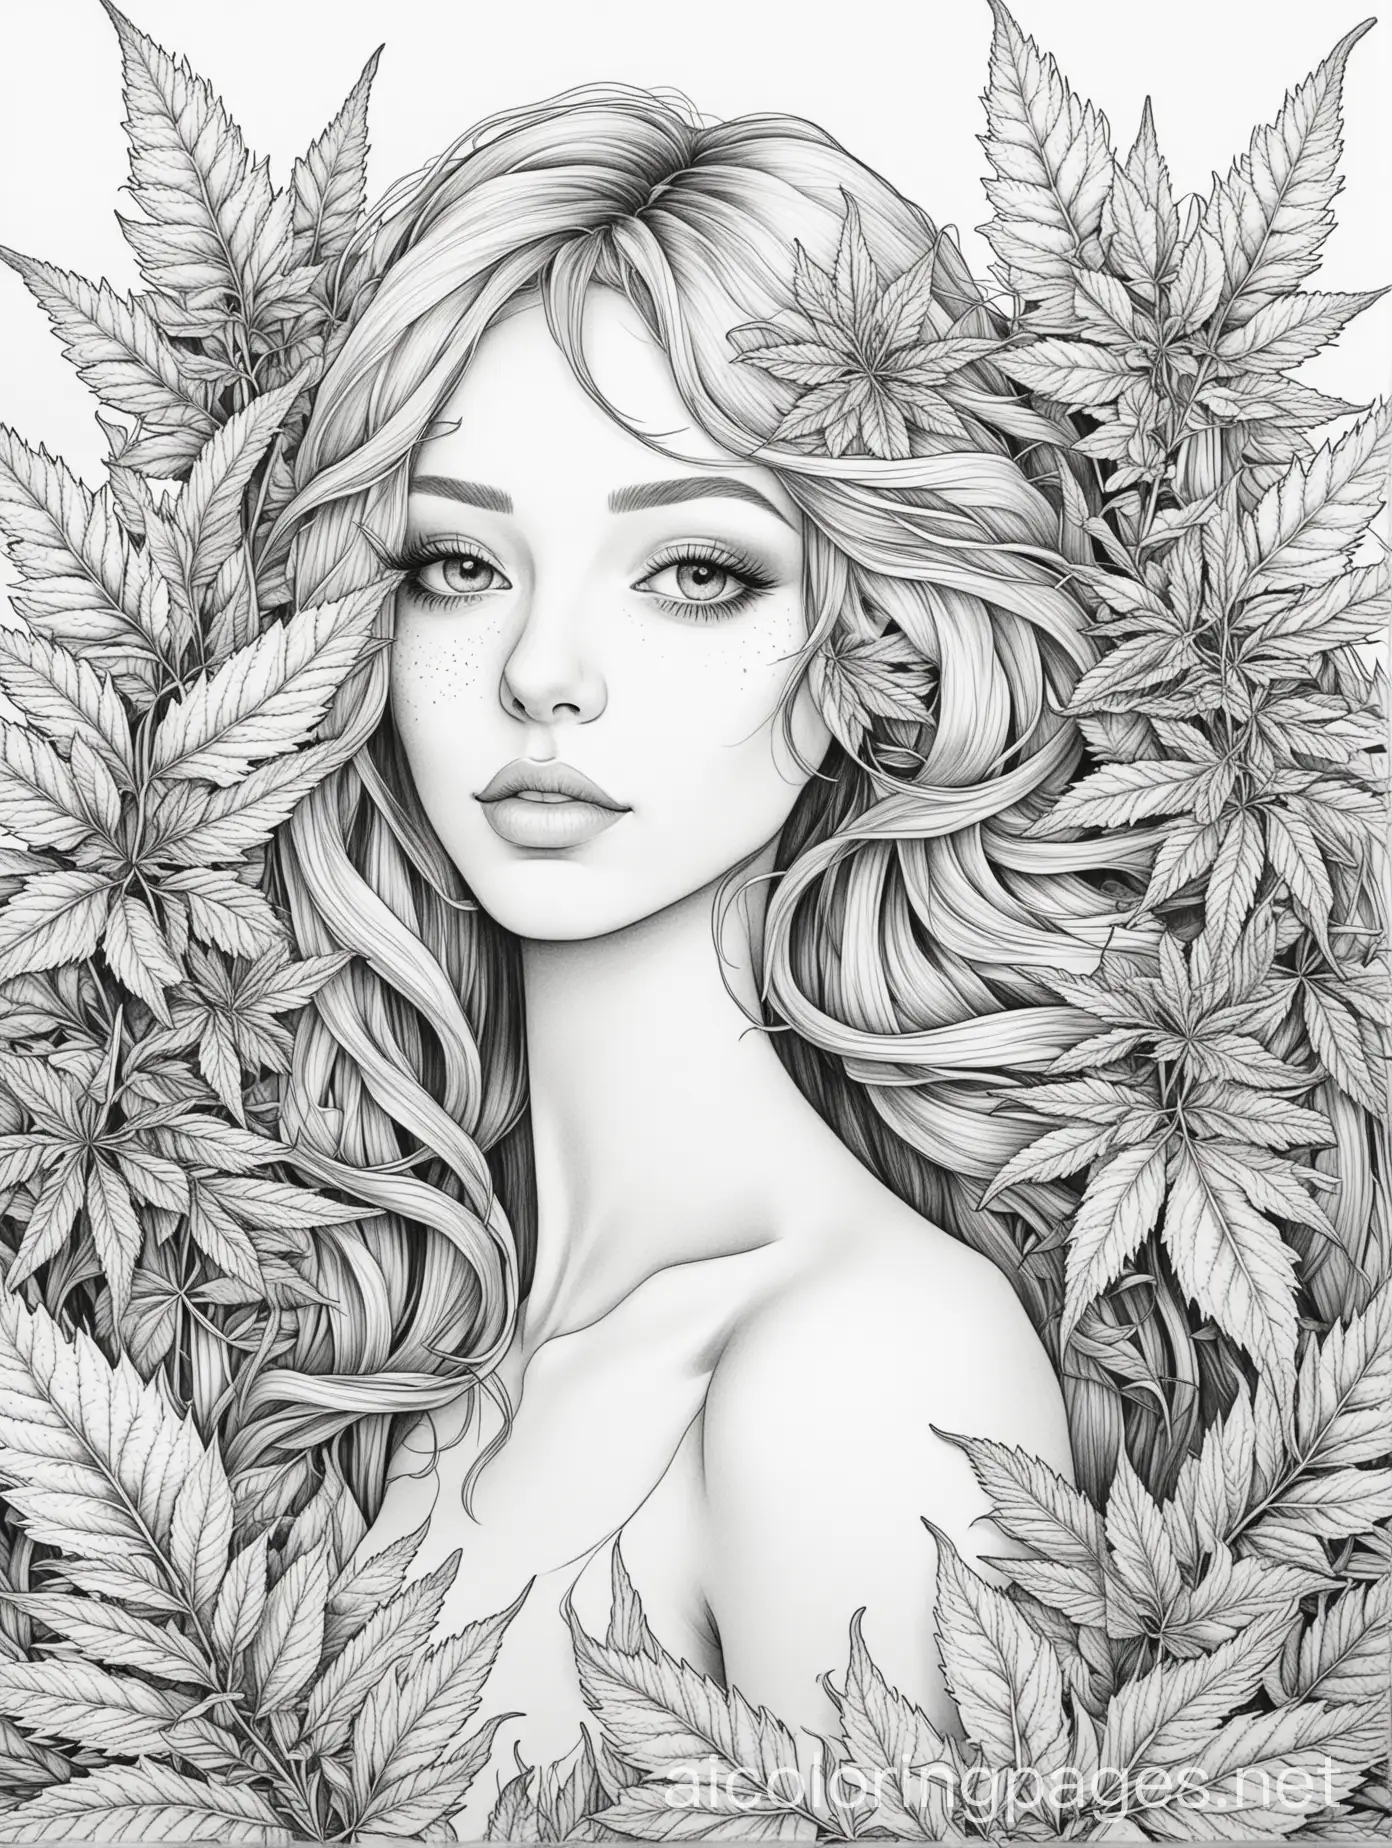 Coloring-Page-Woman-Surrounded-by-Flowers-and-Cannabis-Leaves